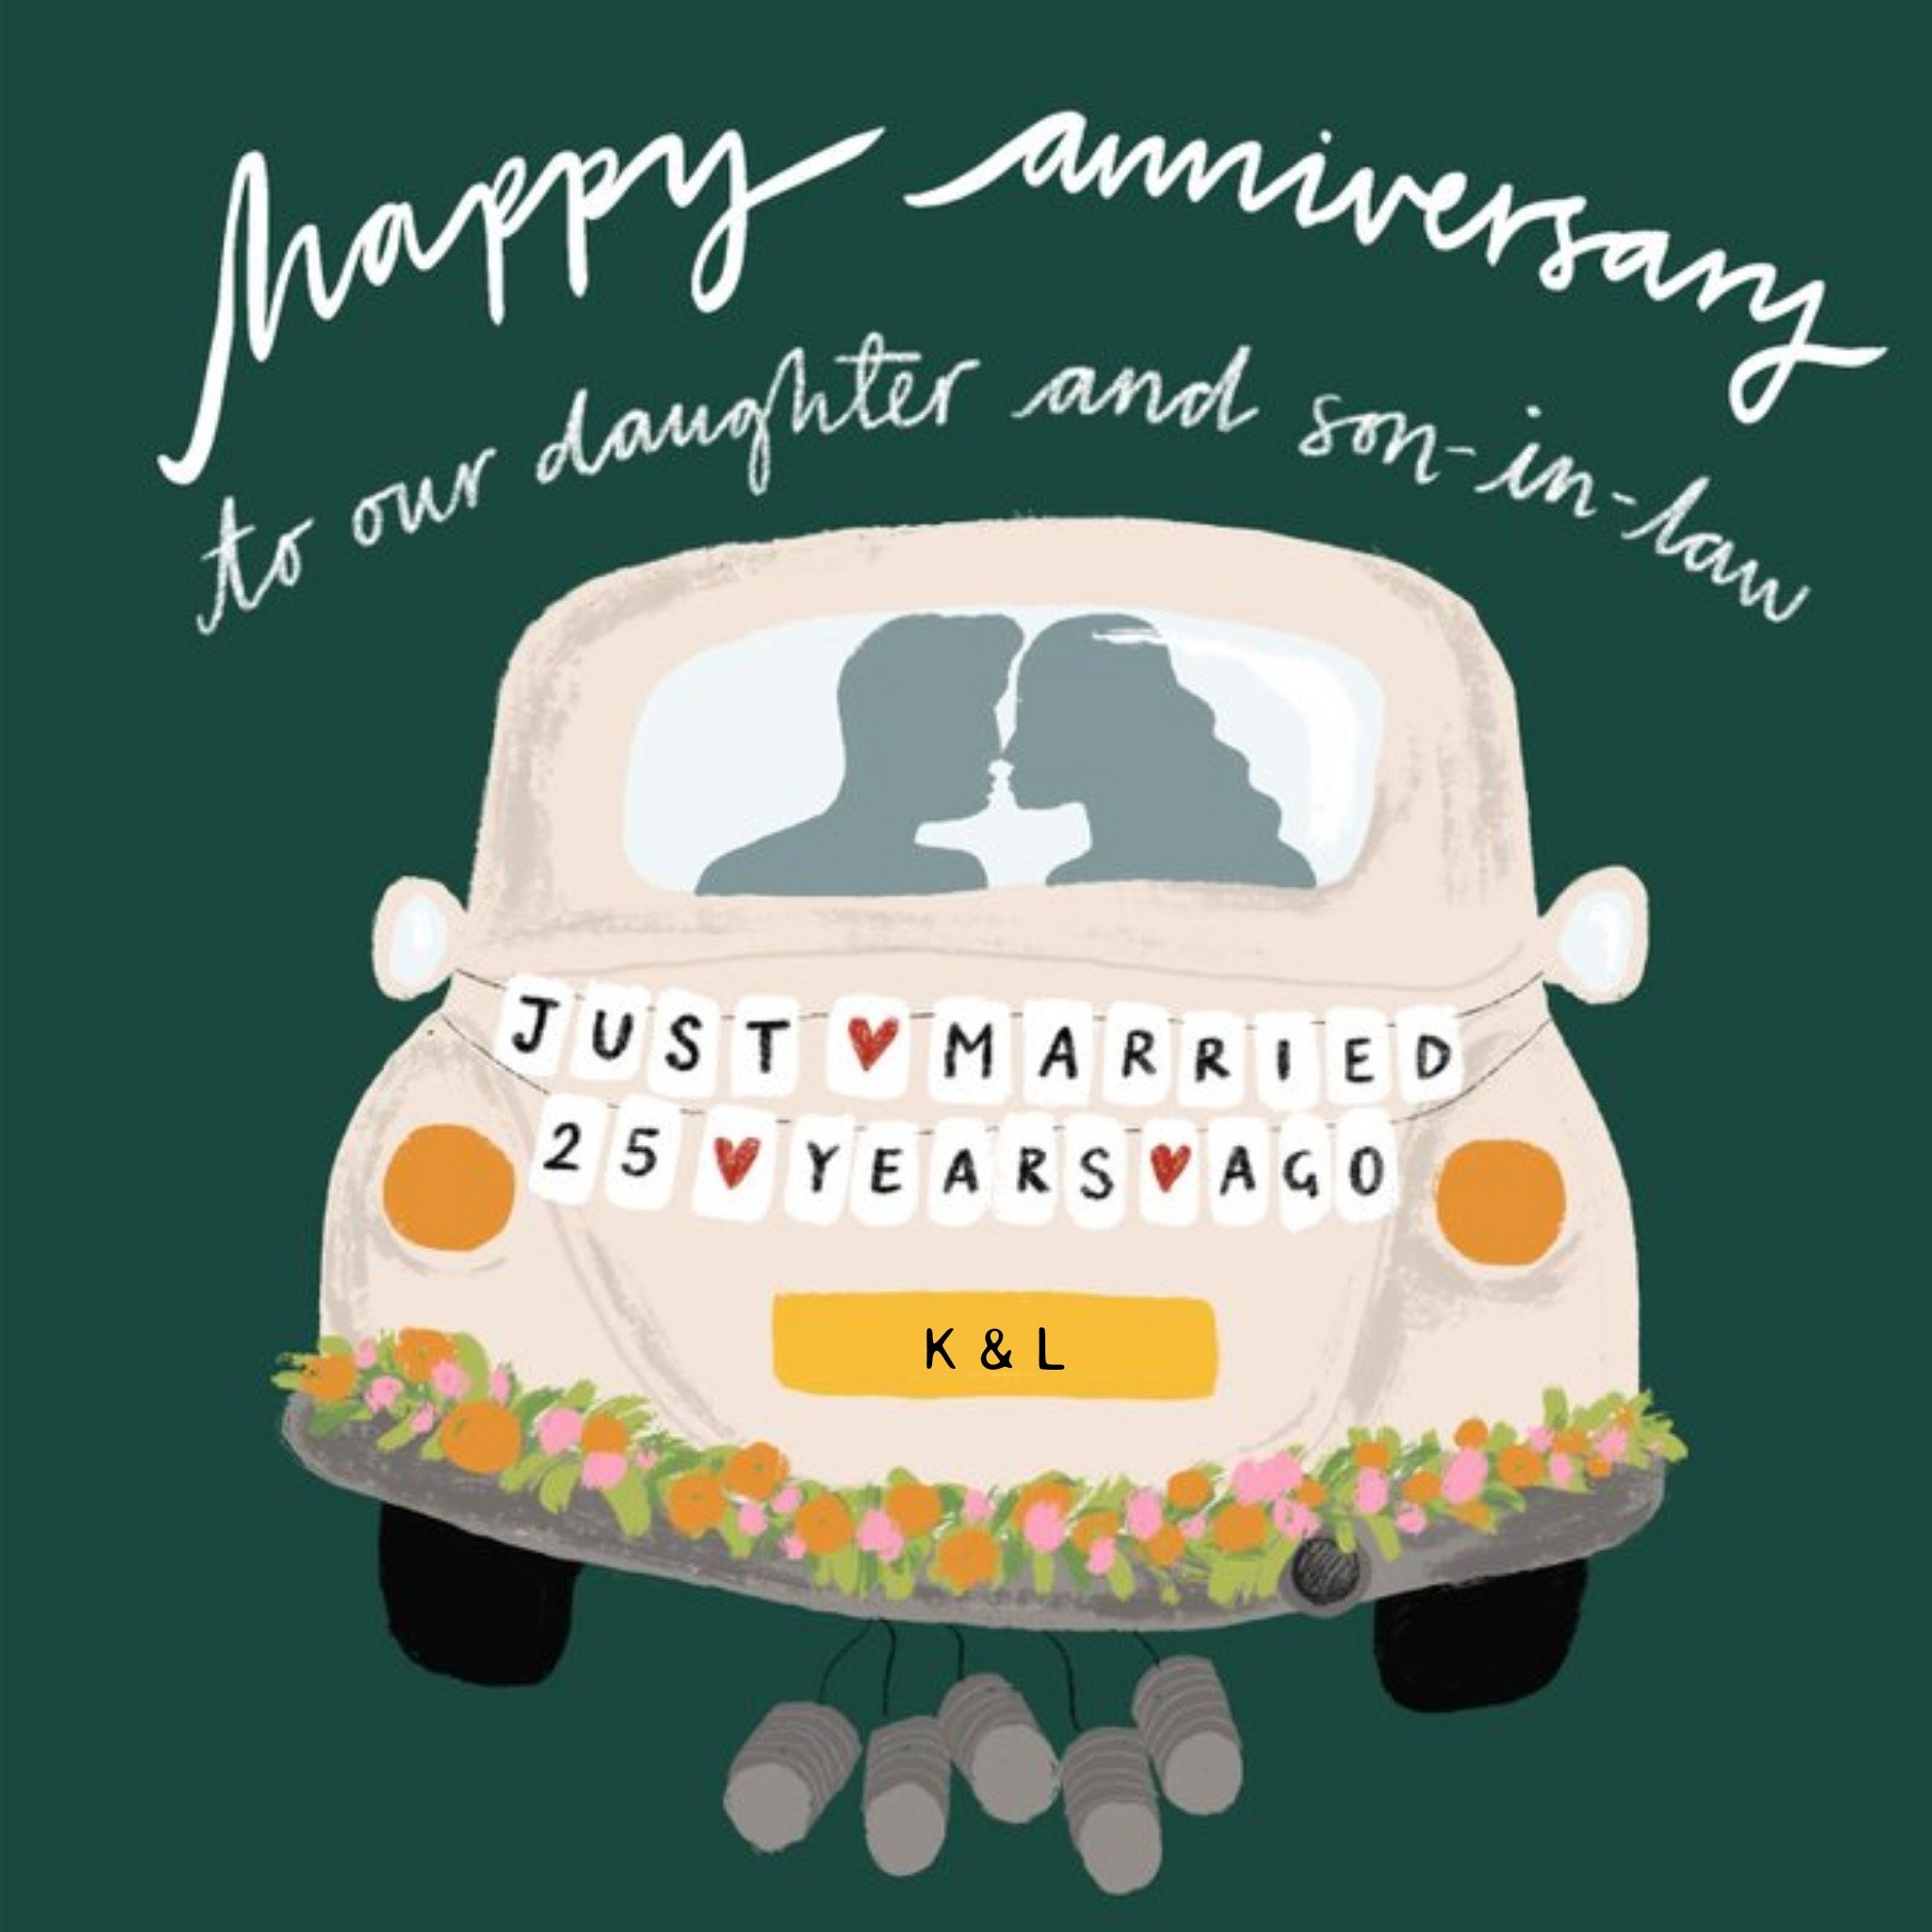 Moonpig Katy Welsh Wedding Car Editable Just Married Happy Anniversary Card, Square